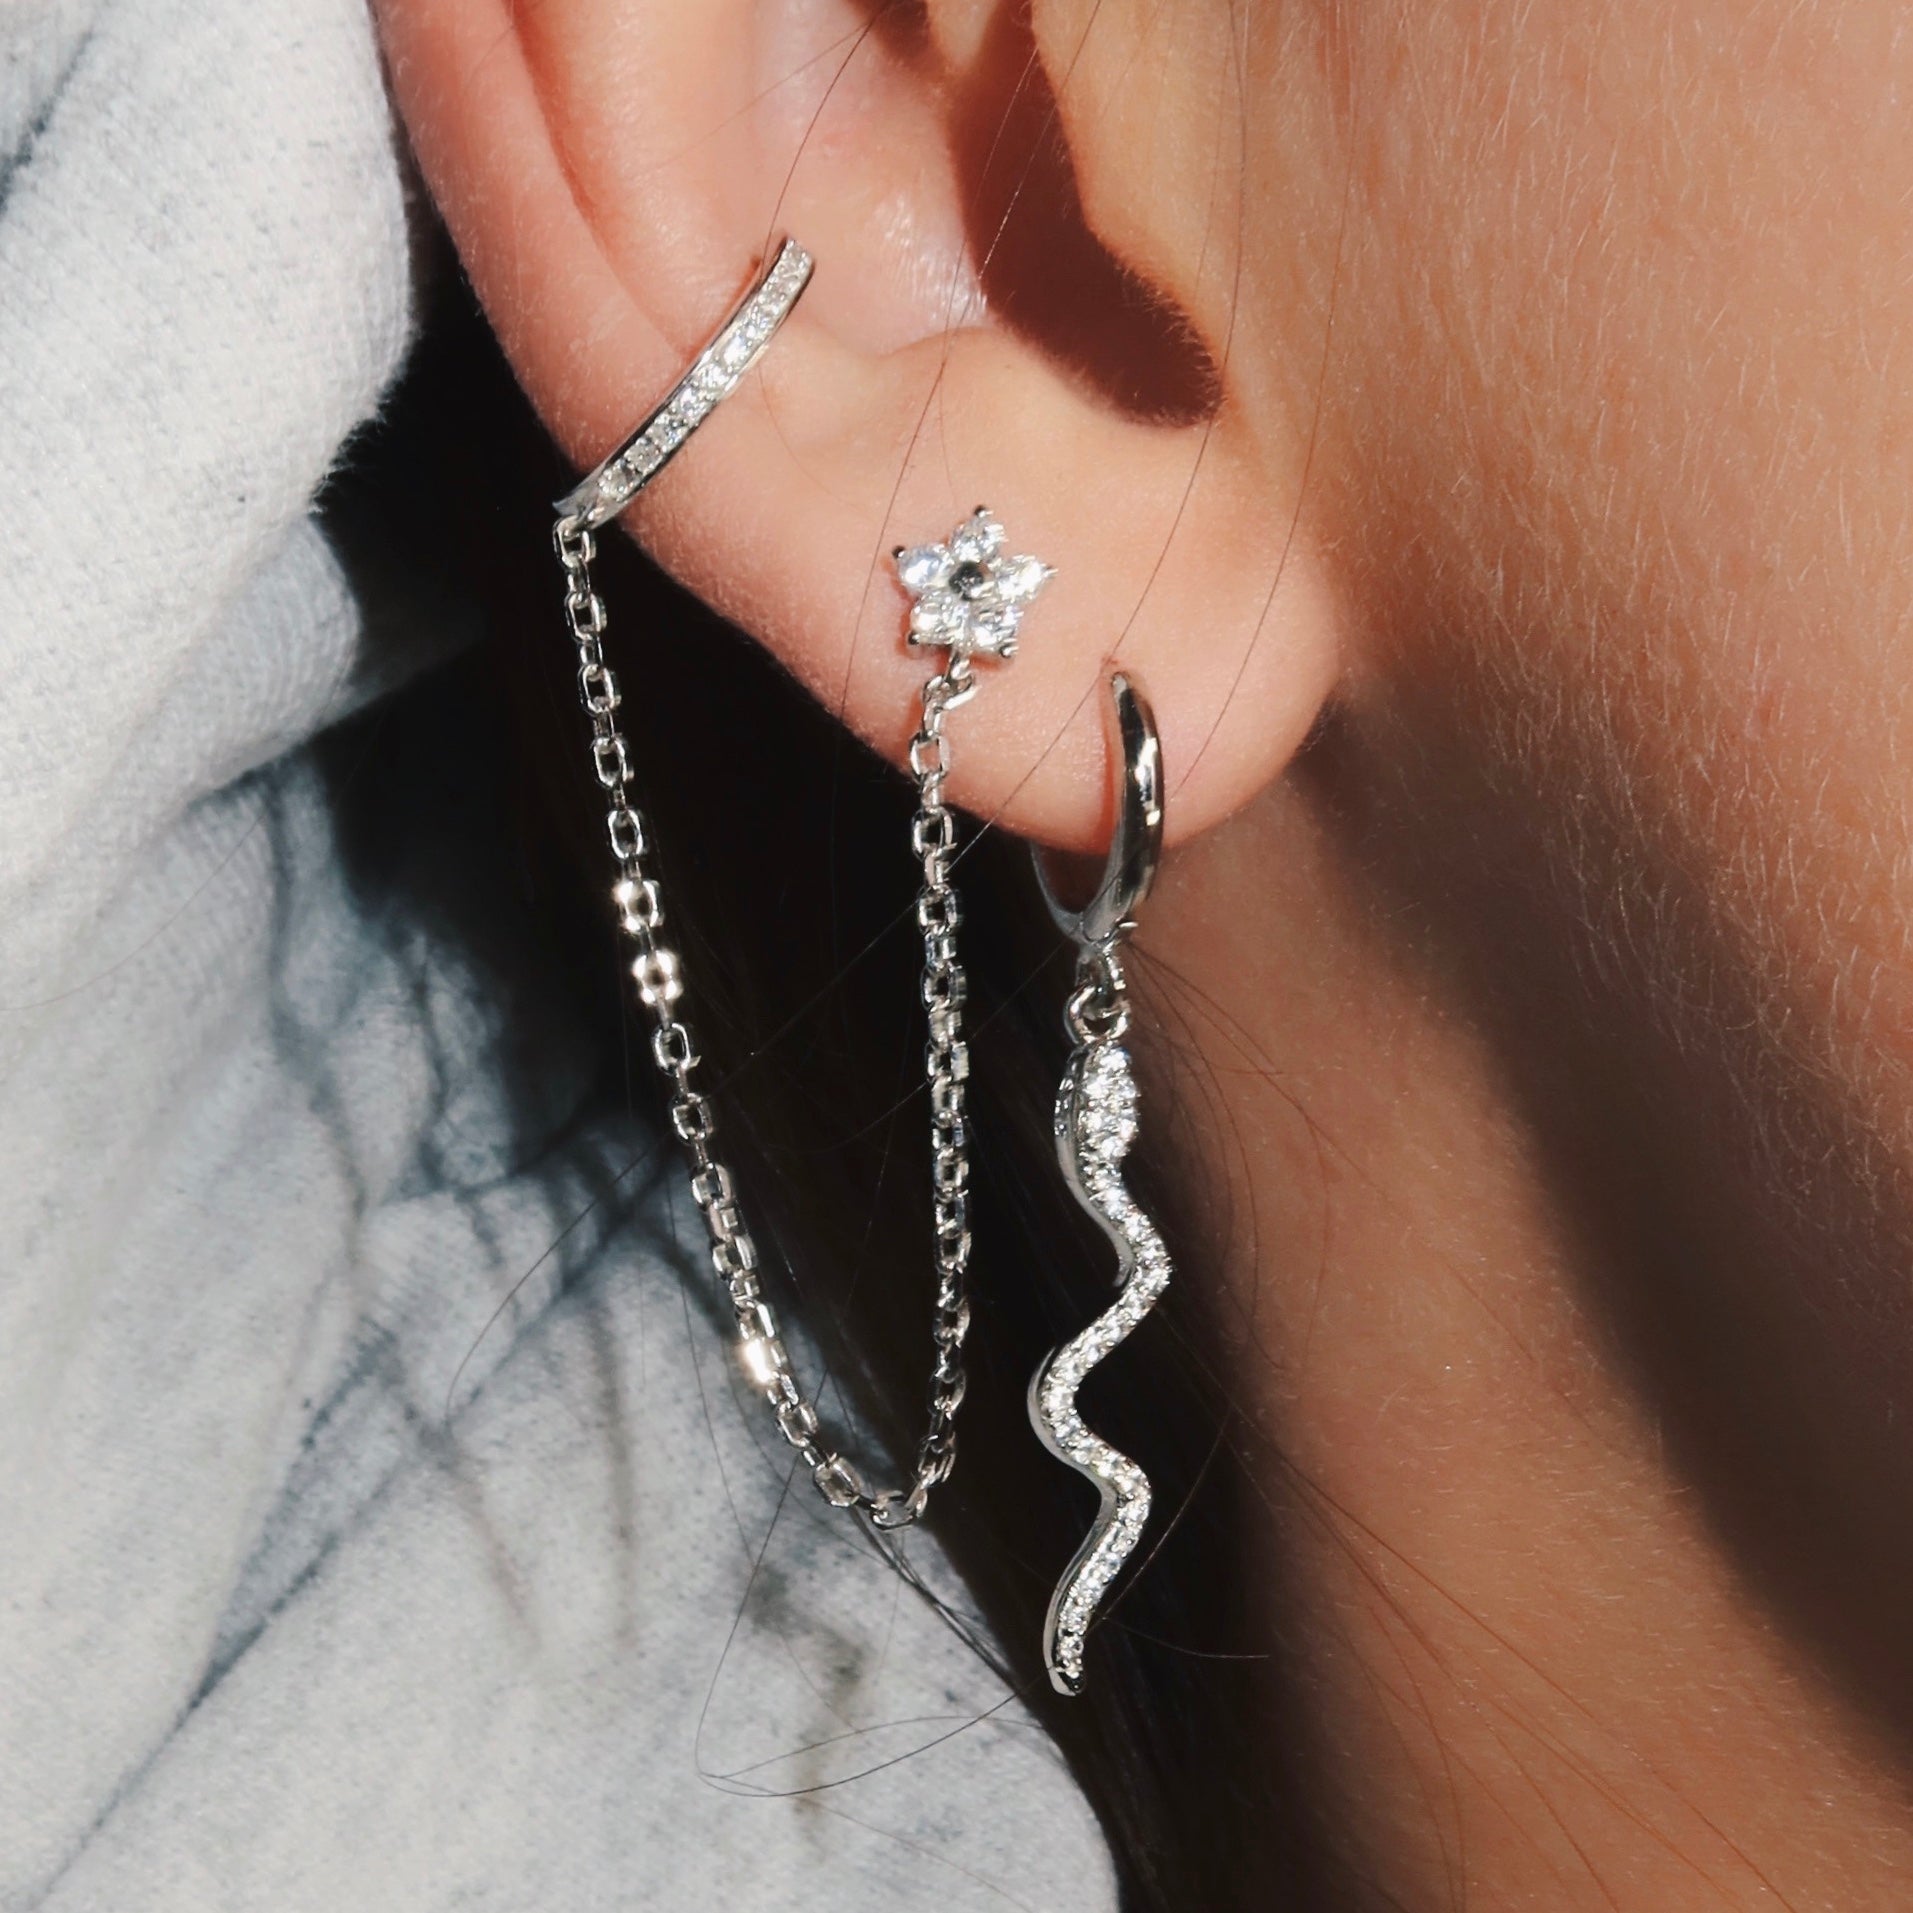 Flower Earstud & Connected Cuff Silver